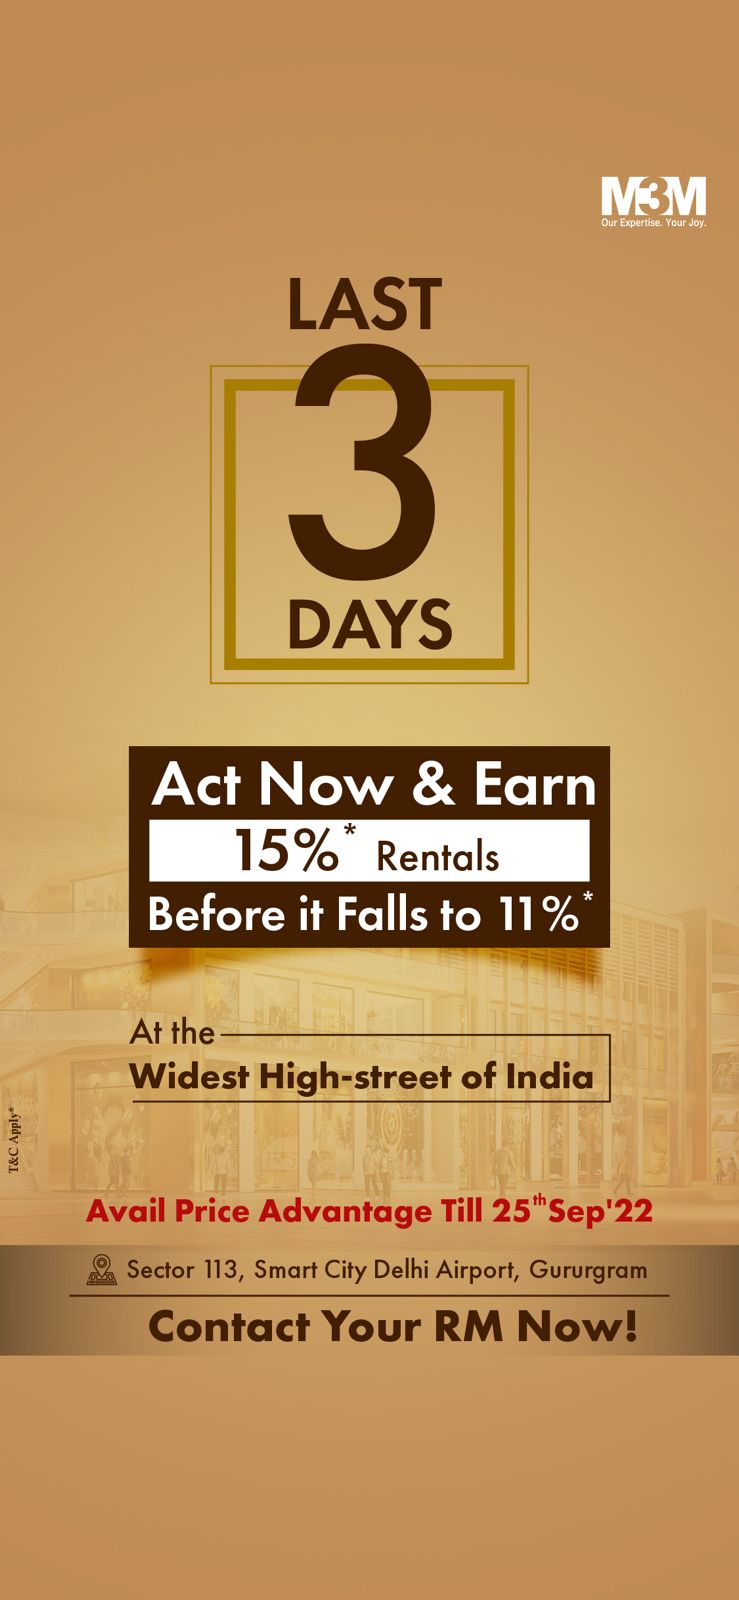 Last 3 days act now and earn 15% rentals before it falls to 12% at M3M SCO 113 Market, Gurgaon Update